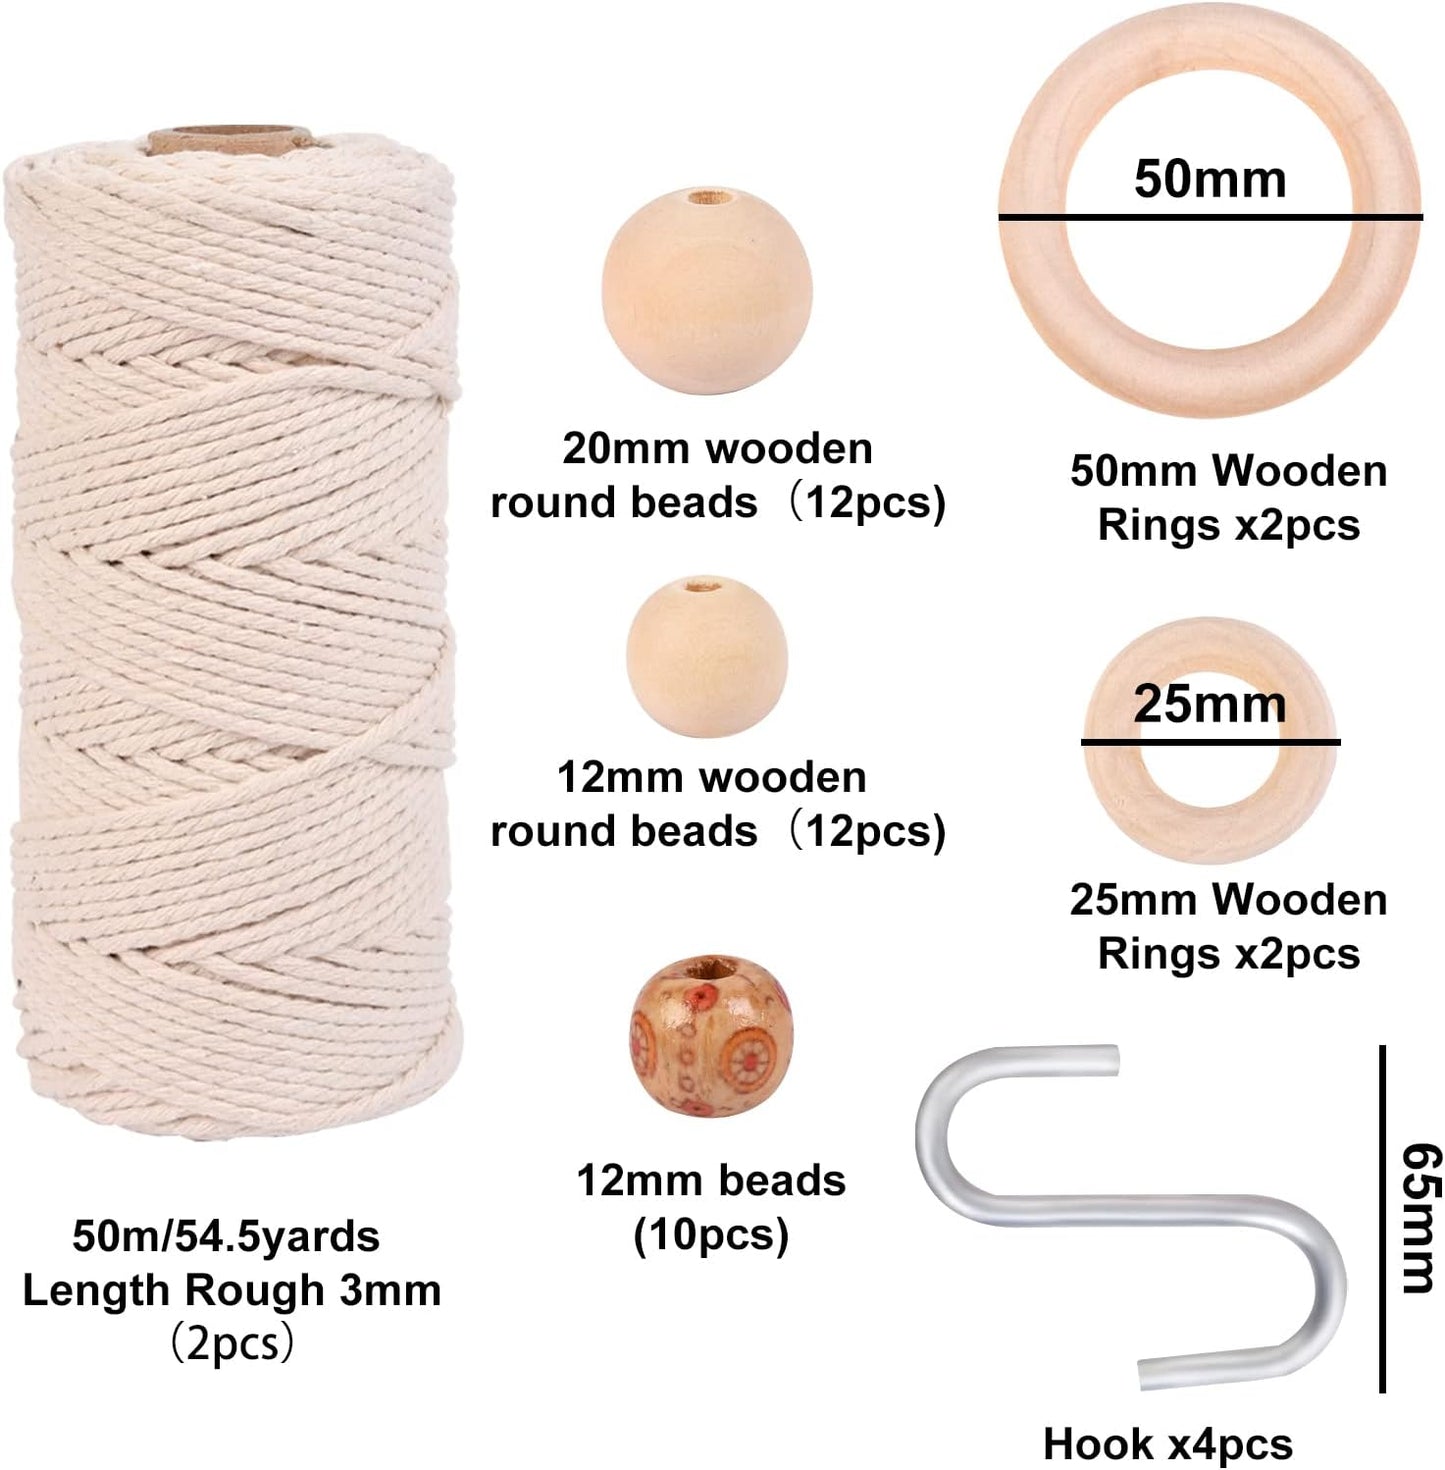 Macrame Cord Kit Macrame Kits with 50Pcs Macrame Supplies 109 Yards 3Mm Cotton Macrame Plant Hangers Kits with Easy to Follow Instructions for Adult Beginners